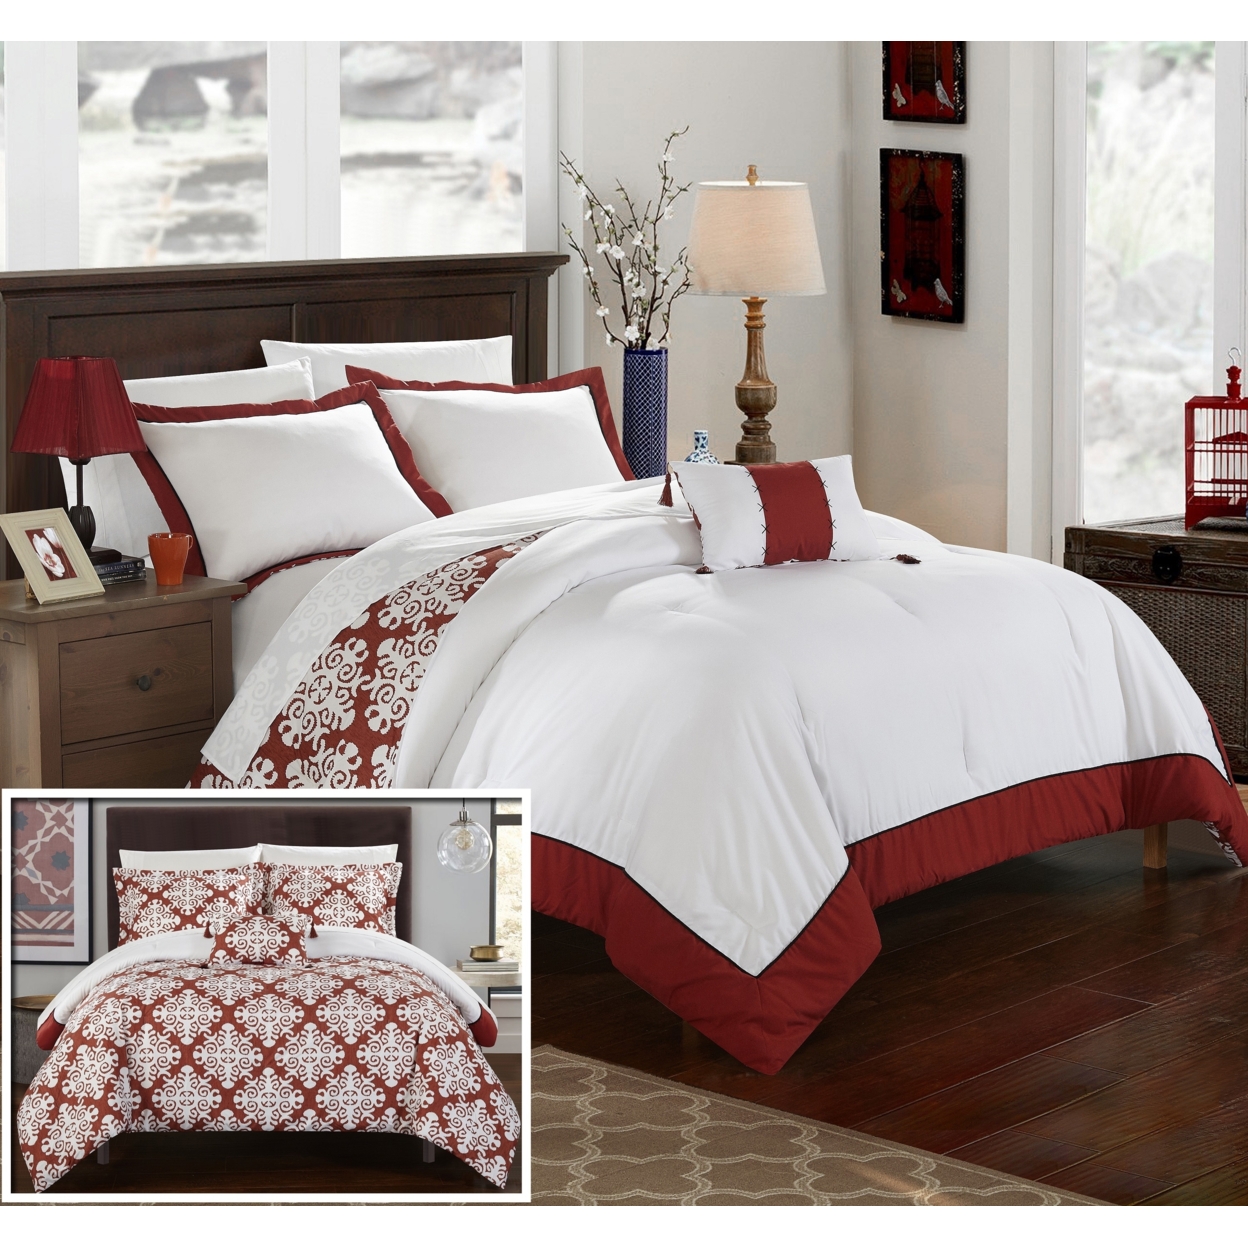 Chic Home 3/4 Piece Mallow Black And White REVERSIBLE Medallion Printed PLUSH Hotel Collection Duvet Cover Set - Marsala, Twin